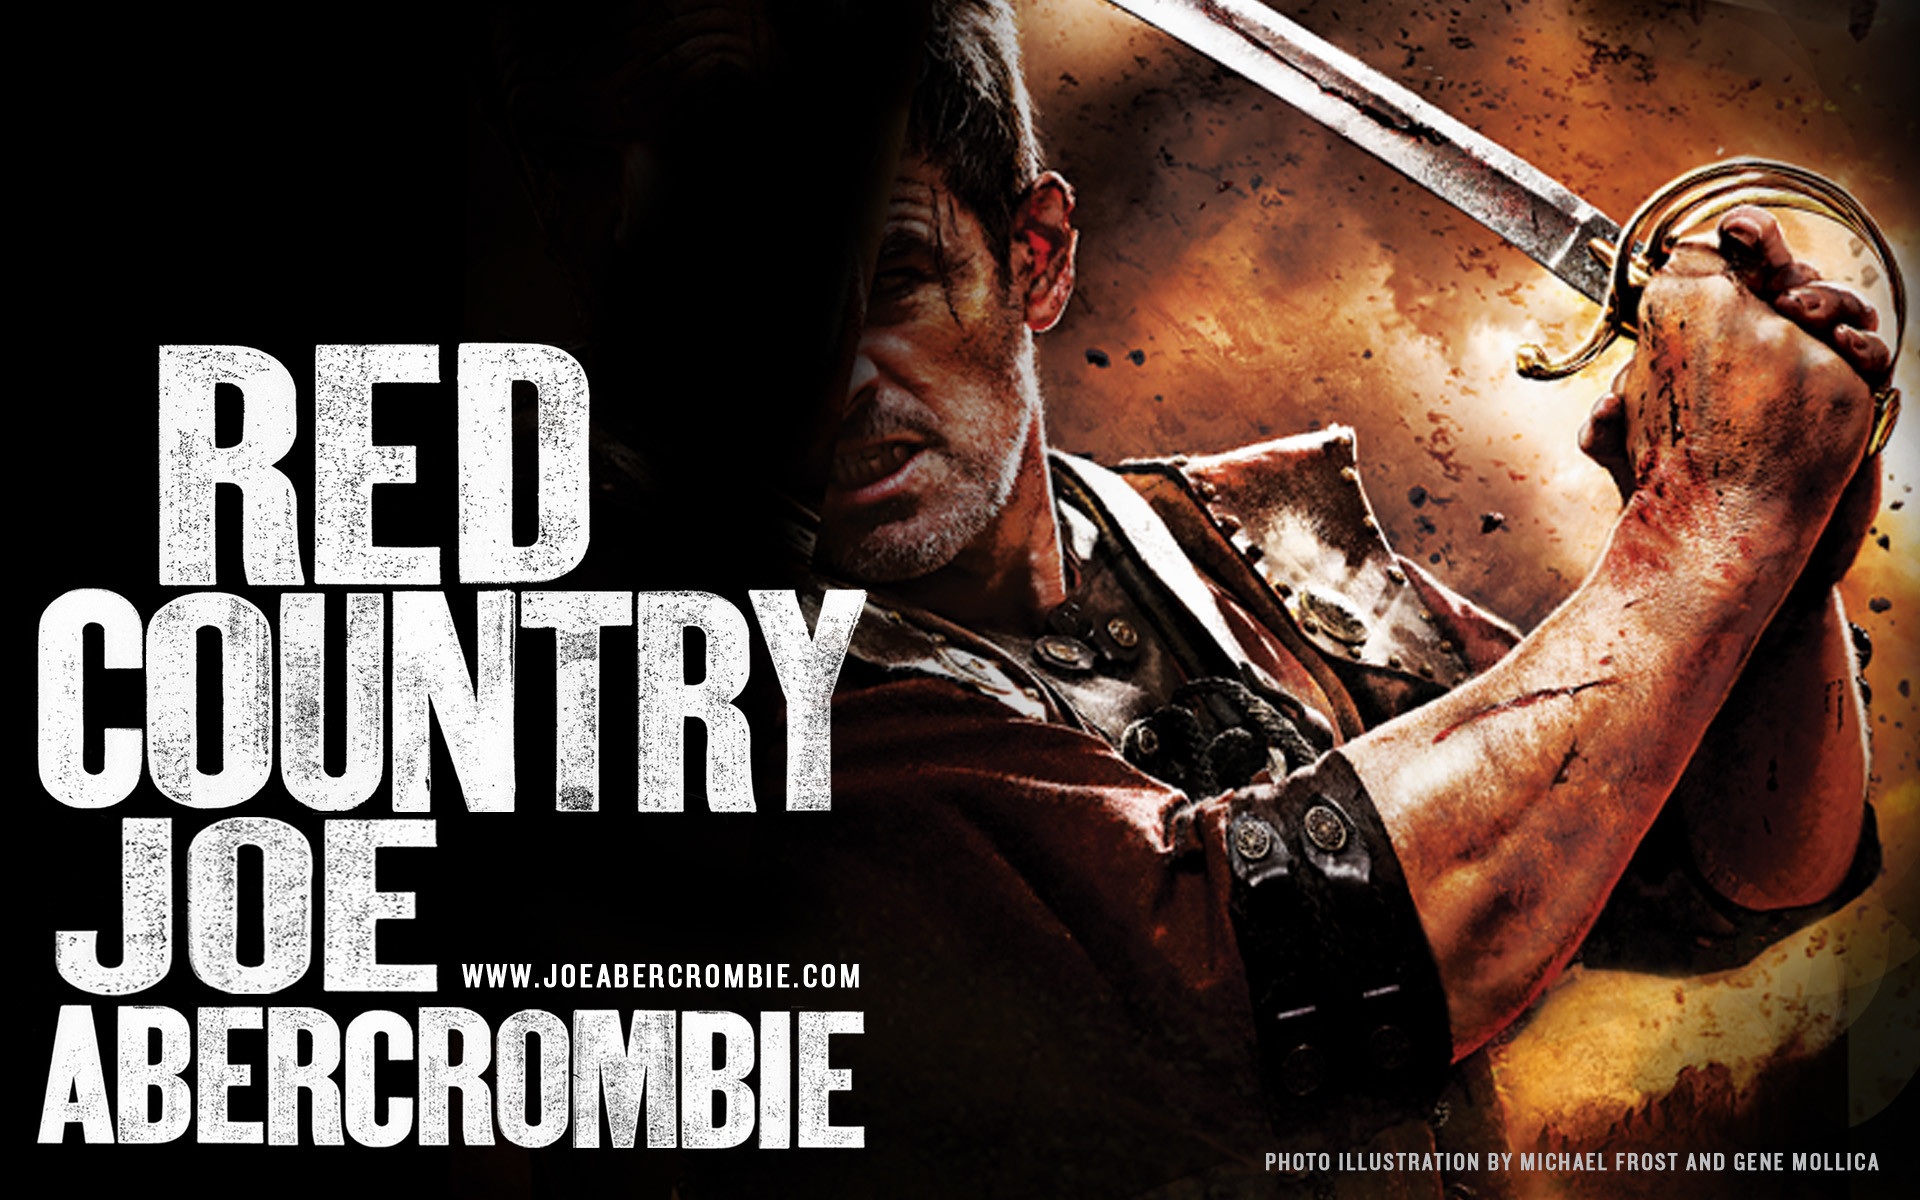 1920x1200 Wallpaper: RED COUNTRY by Joe Abercrombie